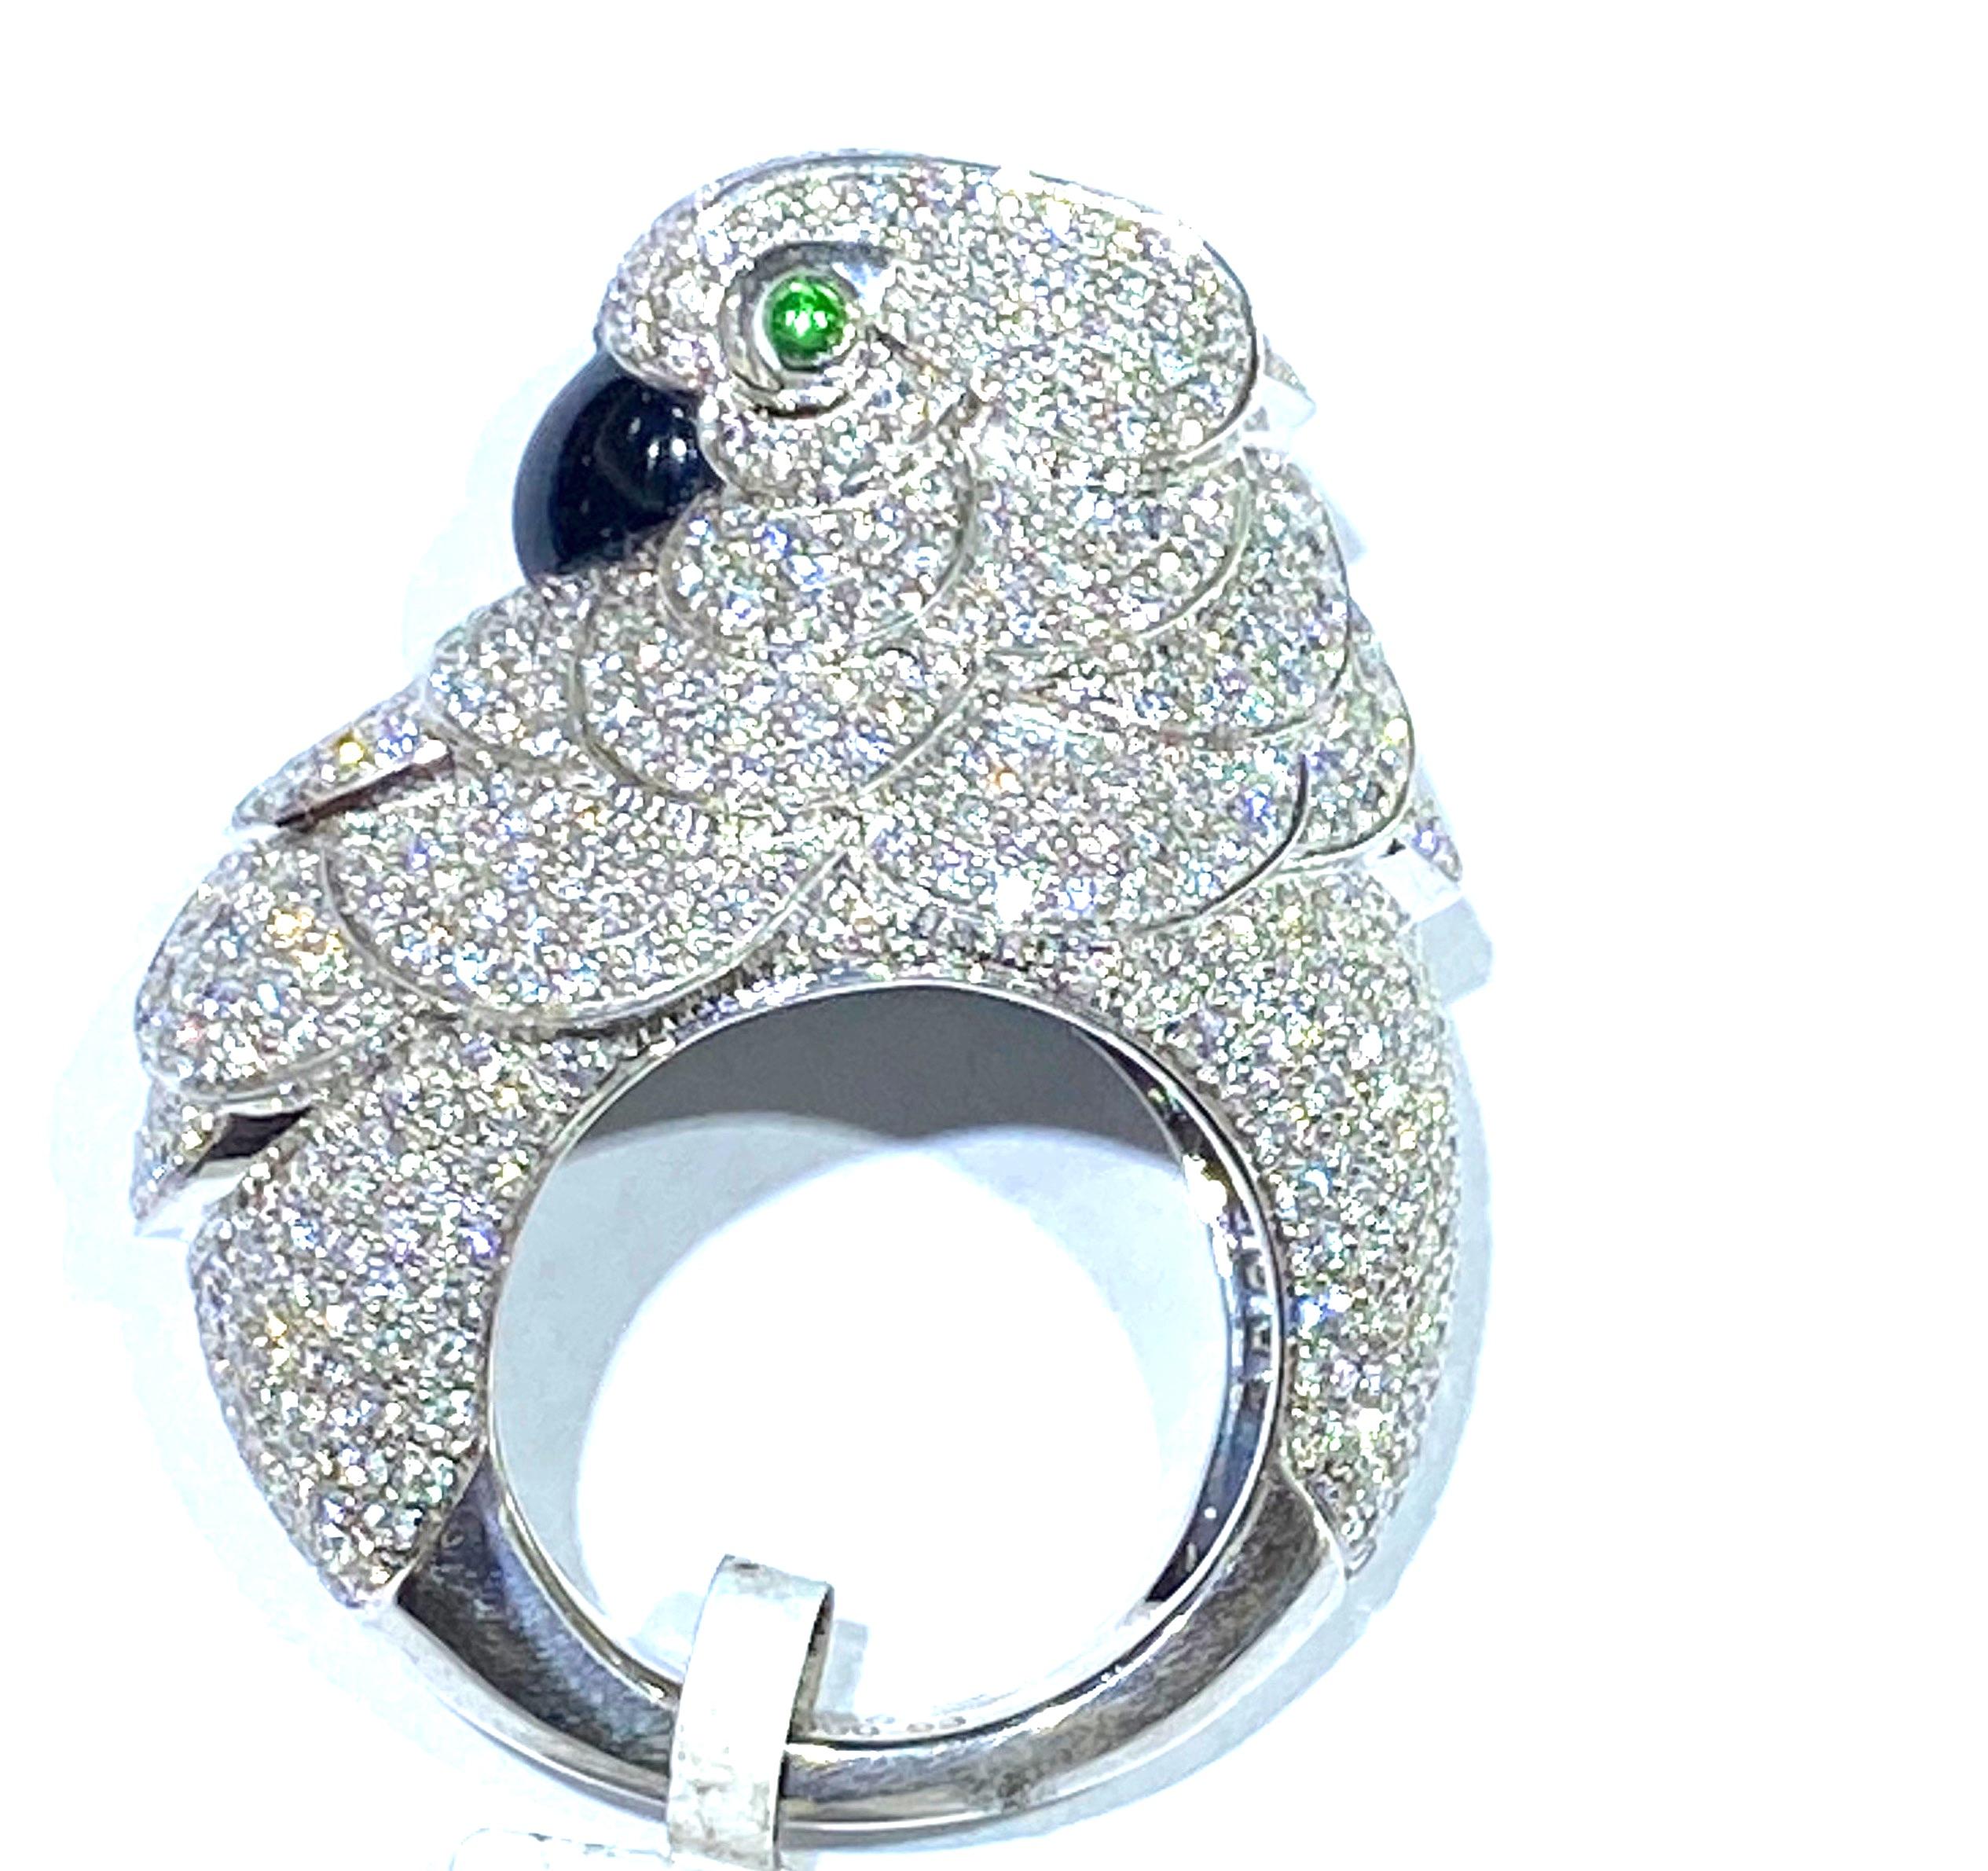 3 Carat Diamond Parrot Statement Ring with Emeralds and Black Onyx

This amazing show-stopper, the ring is a statement for any occasion!

The diamonds are pave set and have a weight of 2.98 carats. The eyes are emeralds and the body has black onyx